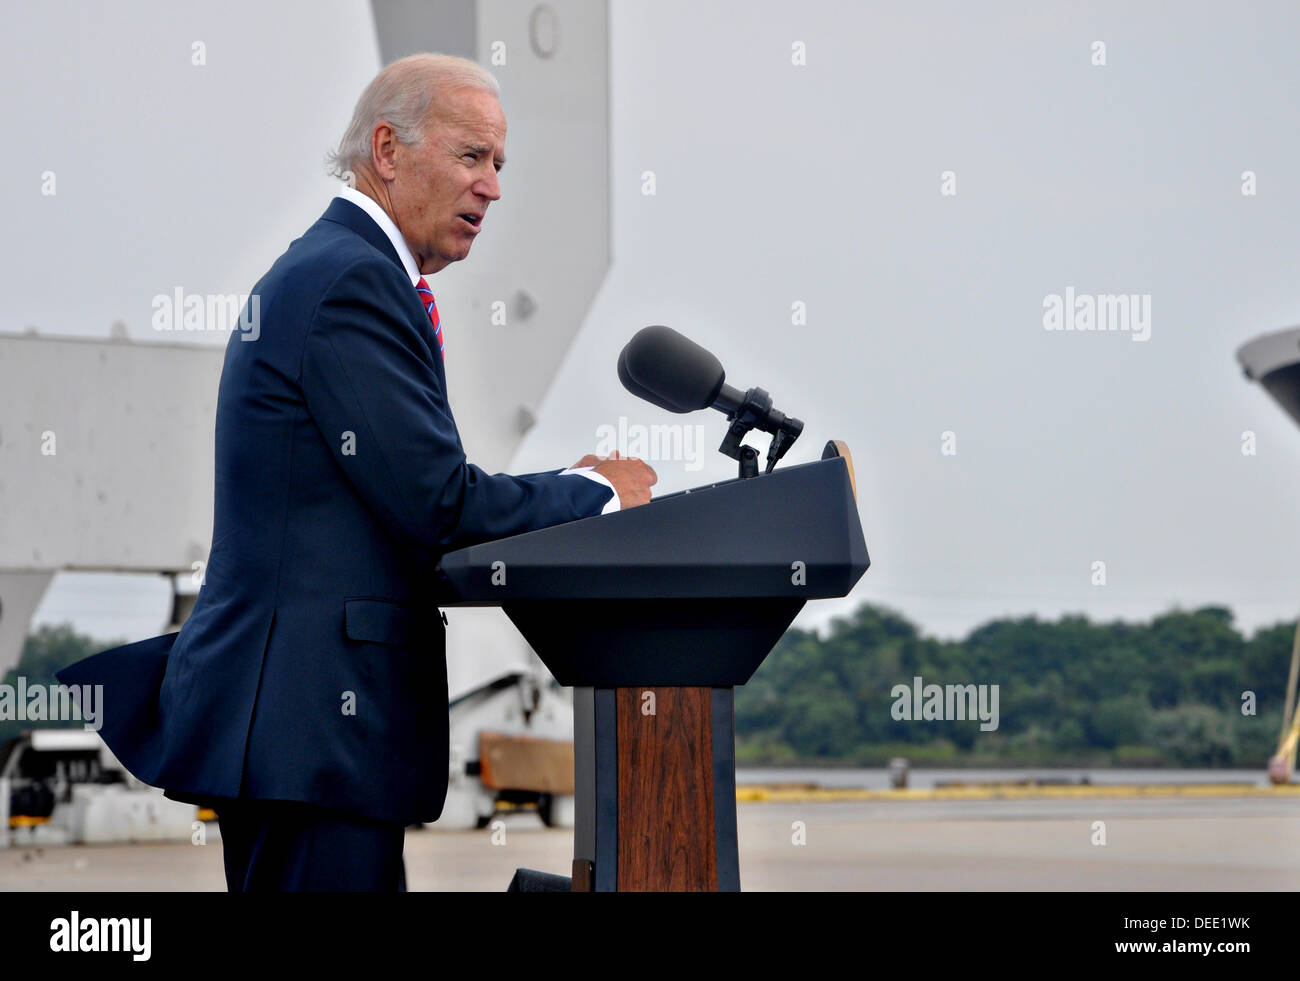 US Vice President Joe Biden gives a speech at the Georgia Ports Authority's Garden City Ocean Terminal September 16, 2013 in Savannah, GA. Biden spoke about the importance of infrastructure investment to exports, economic competitiveness, and job creation. Stock Photo